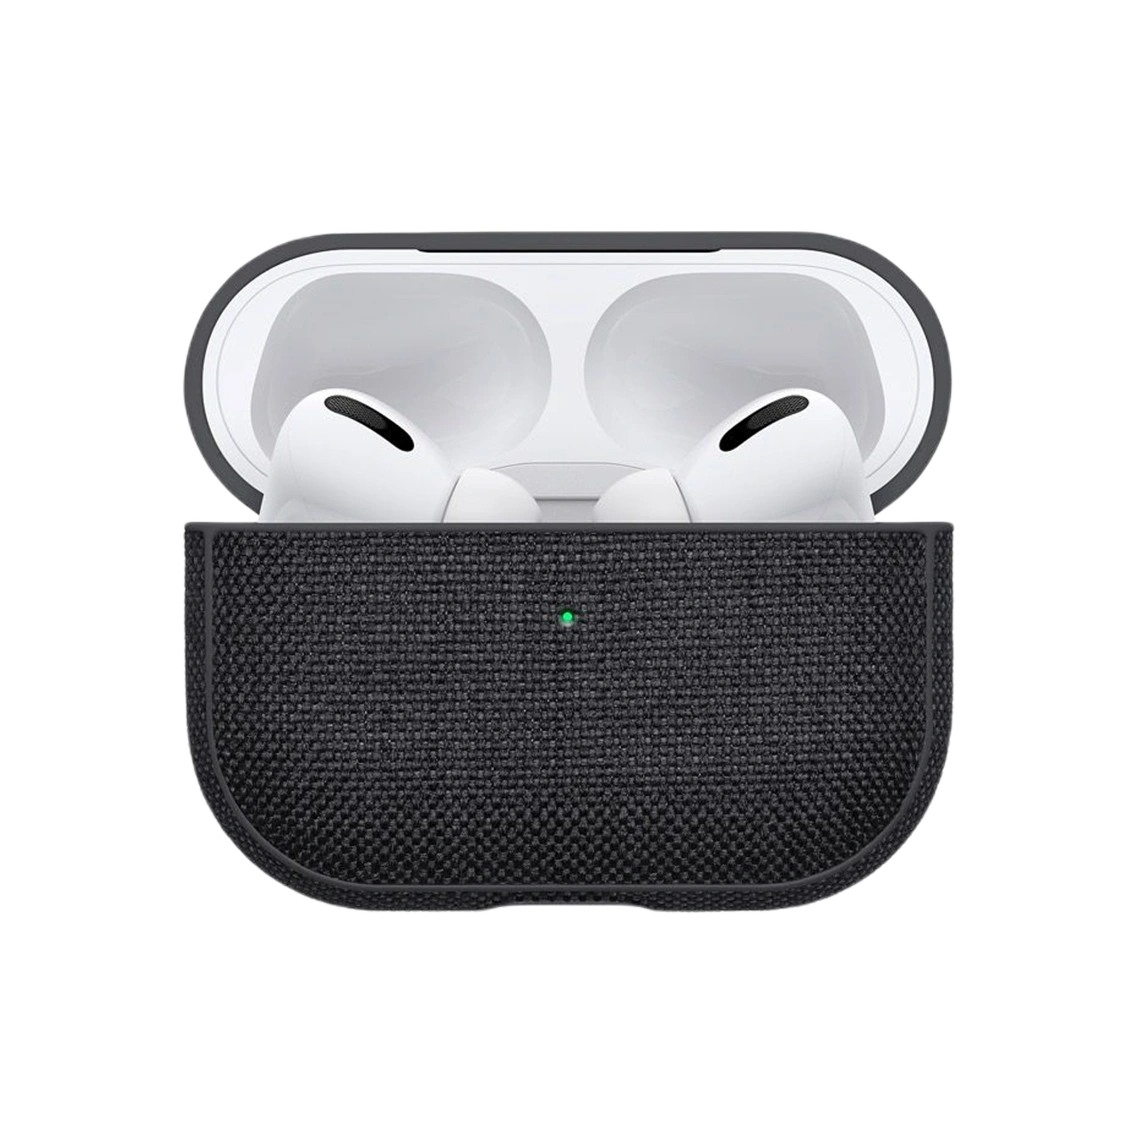 Oxford Protective Case for Airpods Pro